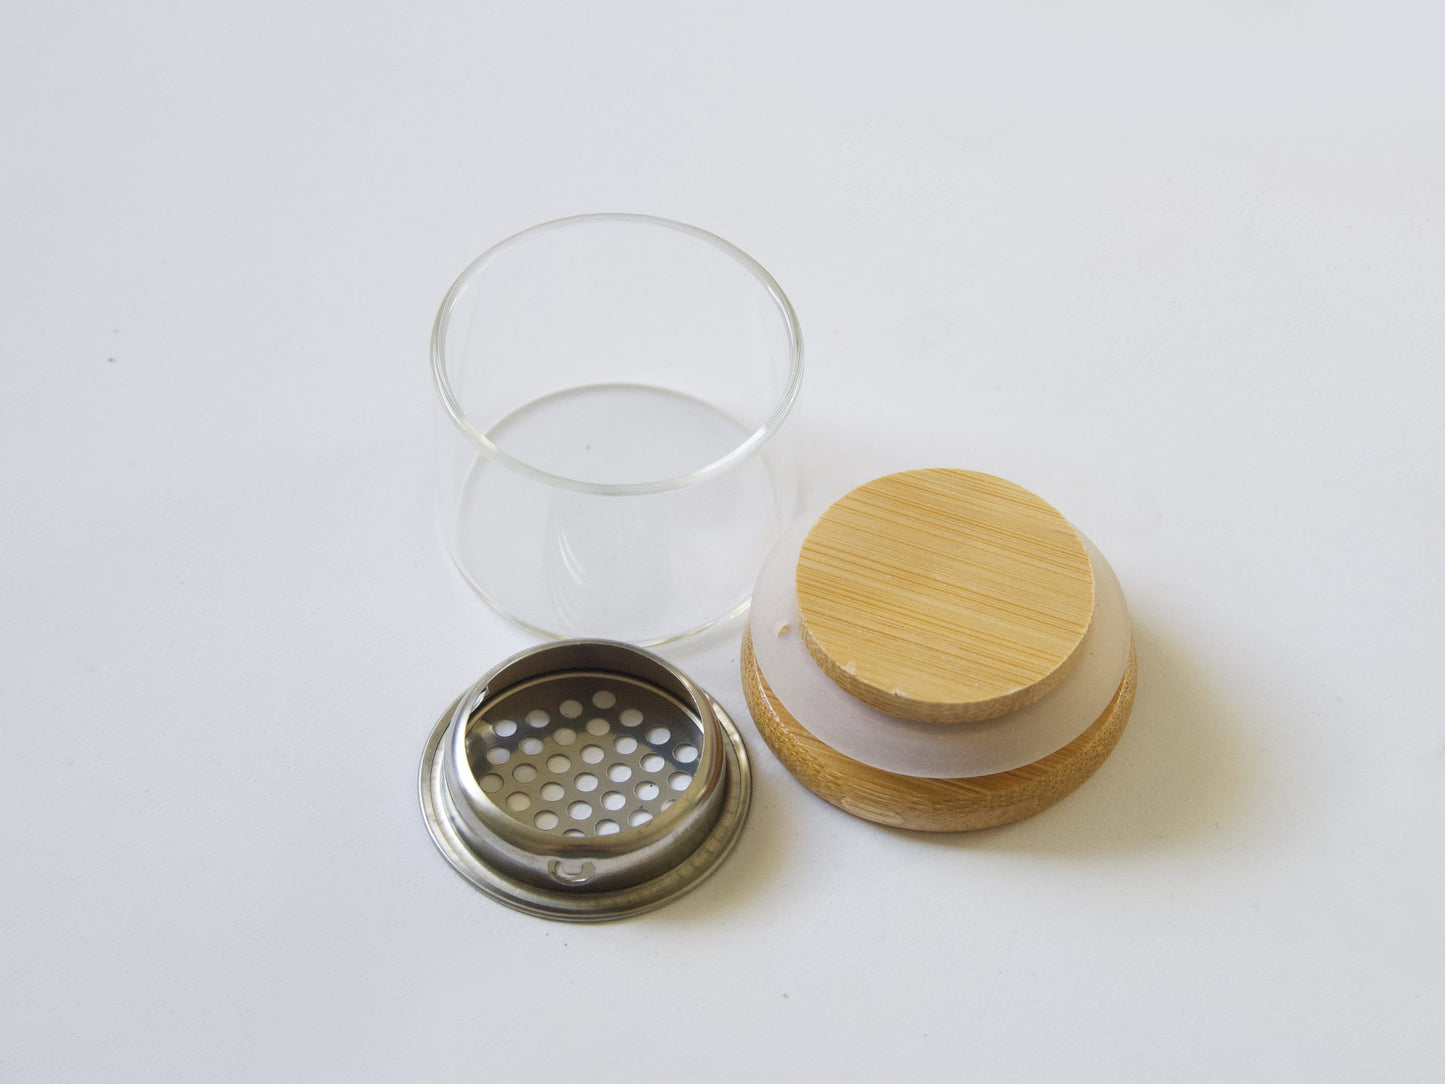 Steel Strainer Brush Cleansing Glass Cup / Nail Brushes Washing Bowl Wood Lid/ Wash off Glitters, Powders, or Gel Remnants Manicure Tool